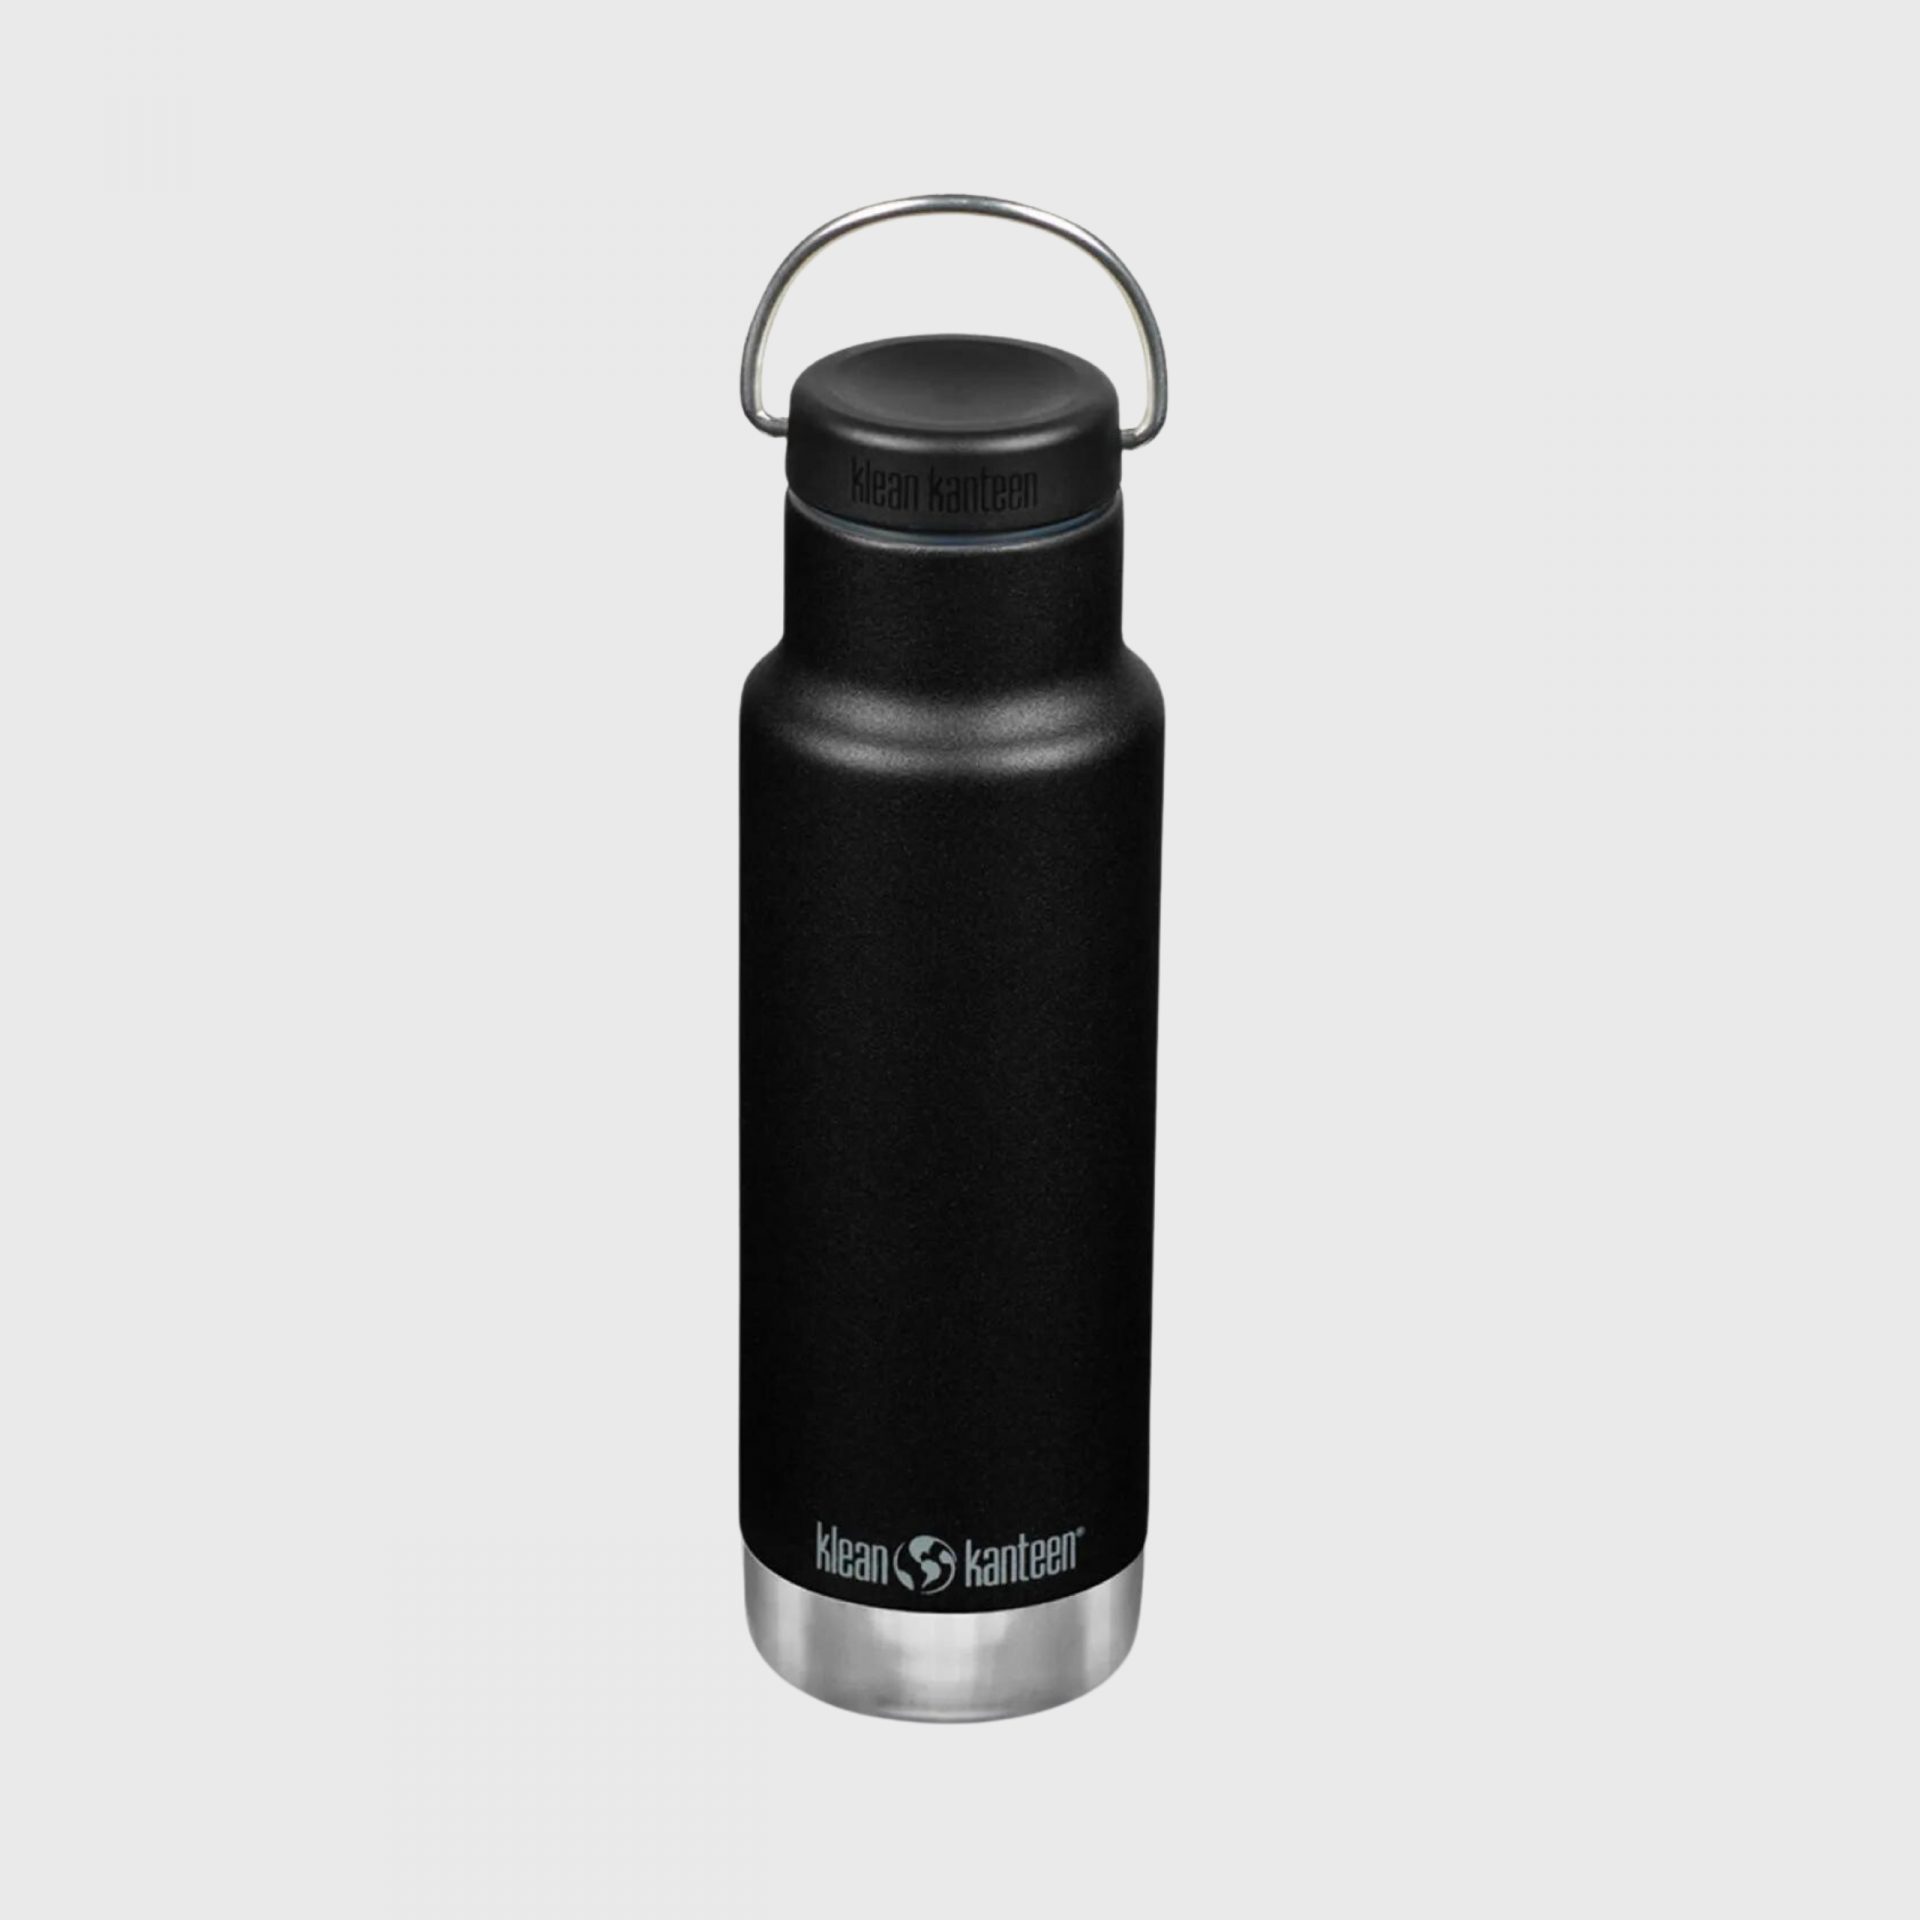 Kleen Kanteen Singapore Insulated Classic 12oz Water Bottle with Loop Cap (Black)